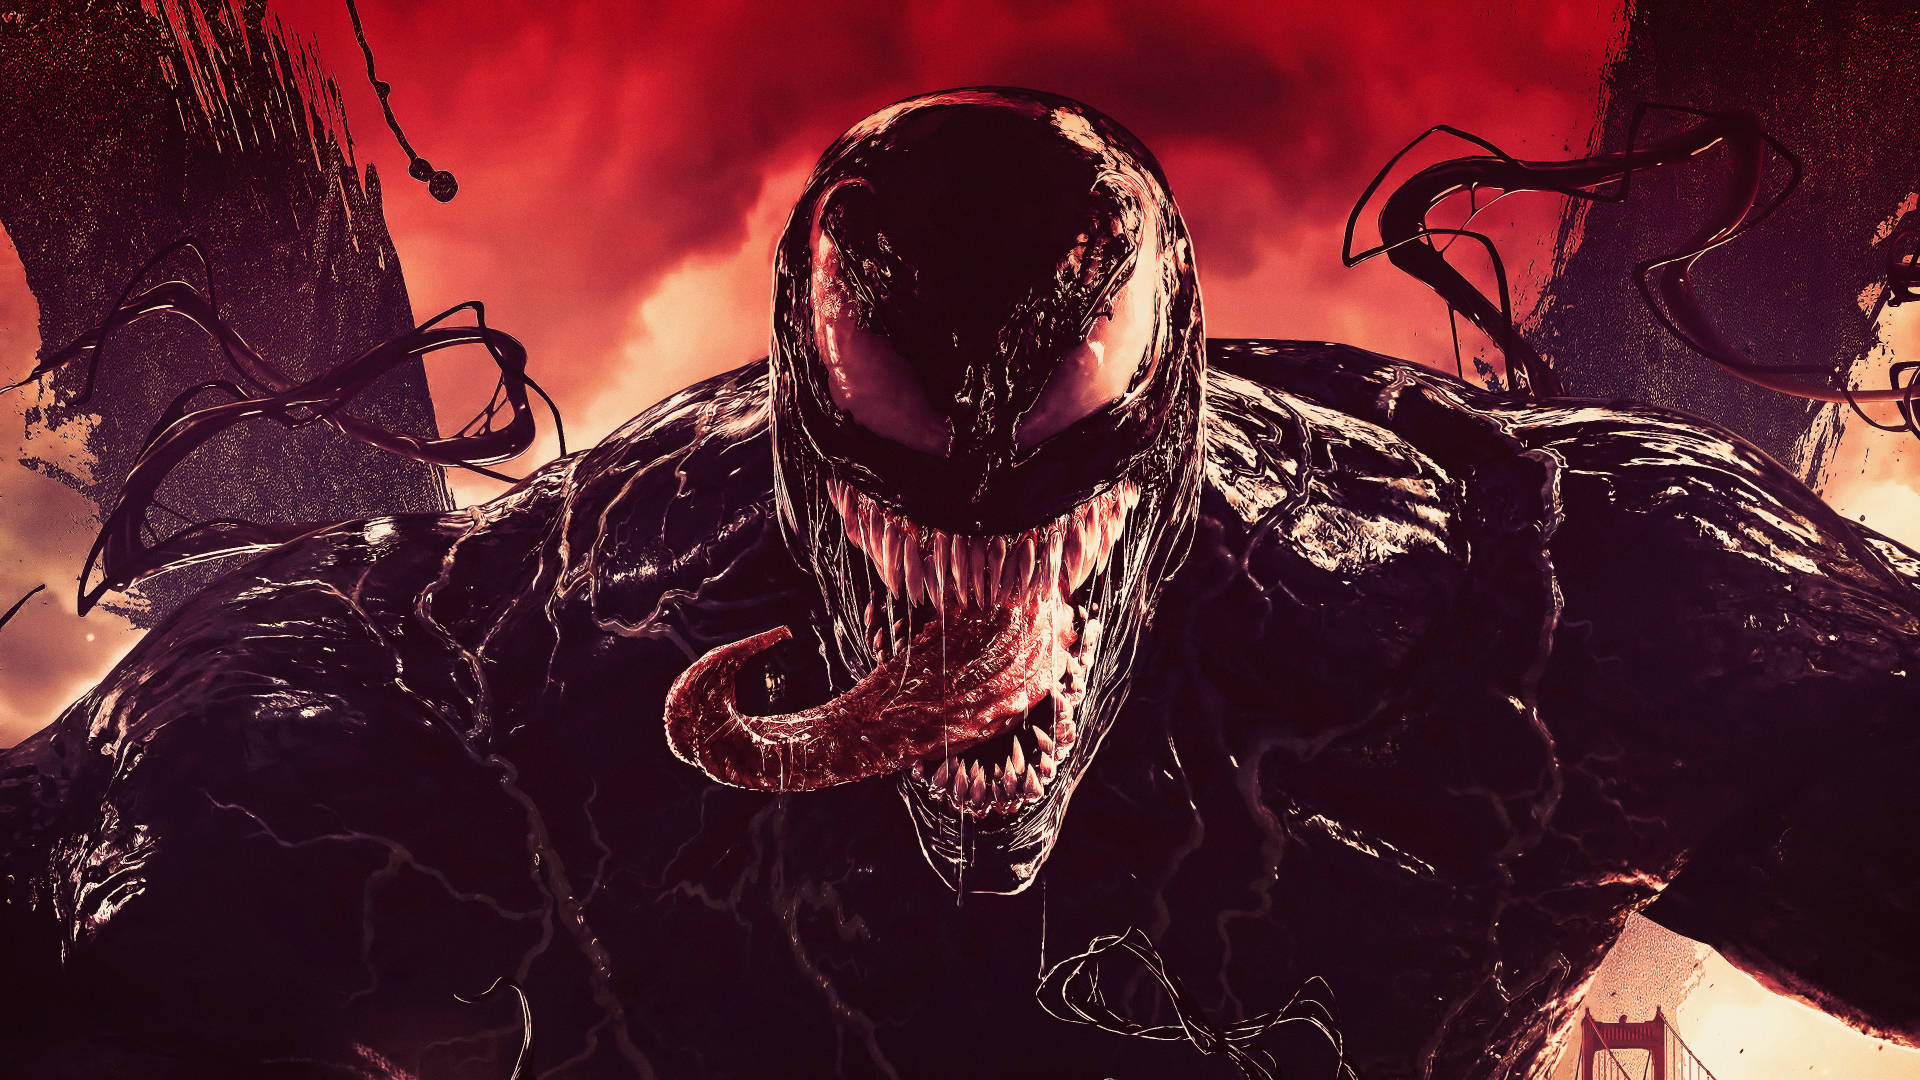 Unleashed Fury - The Ominous Face Of Carnage Background